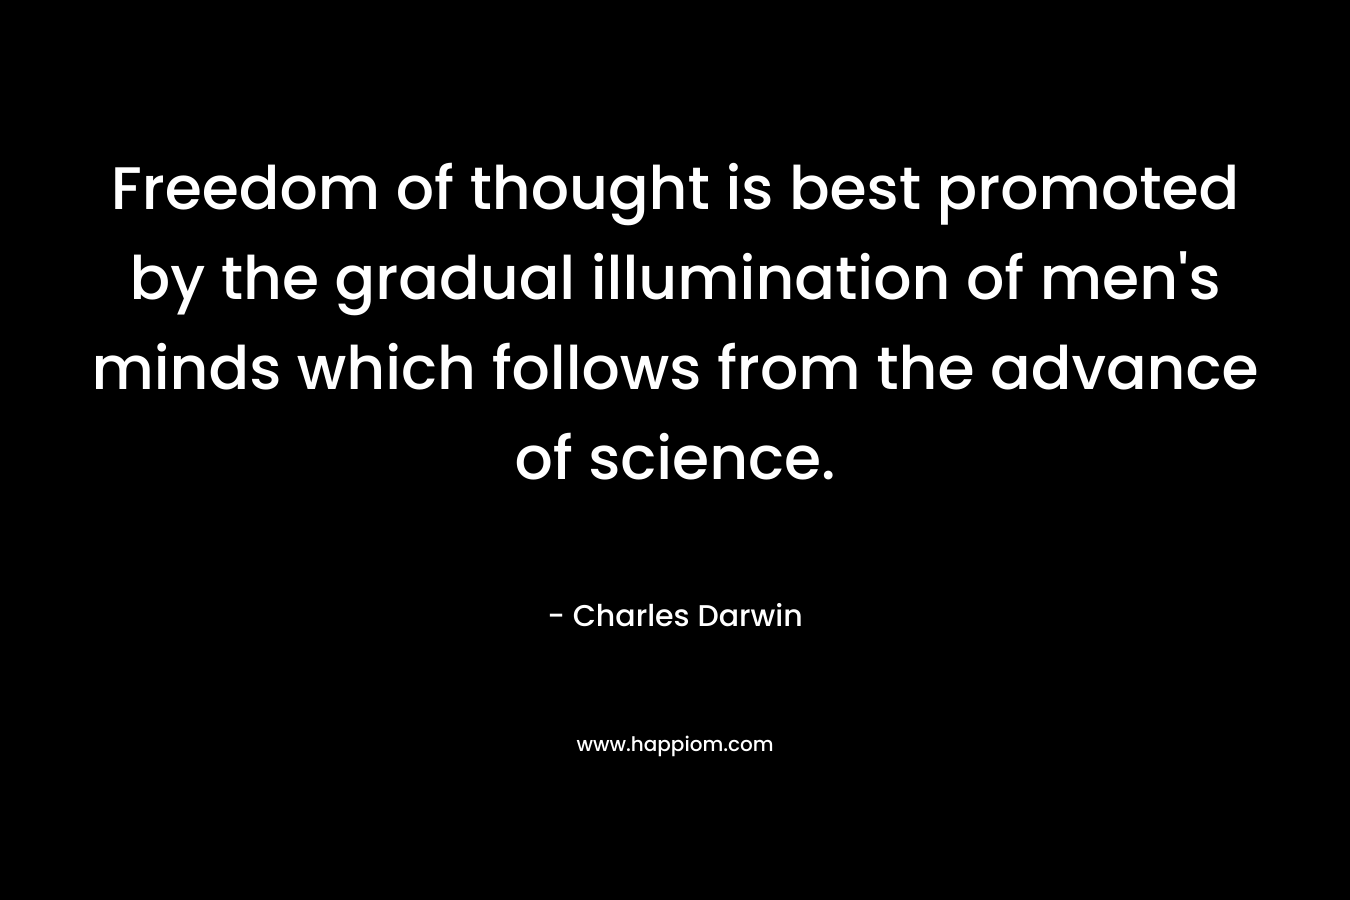 Freedom of thought is best promoted by the gradual illumination of men’s minds which follows from the advance of science. – Charles Darwin